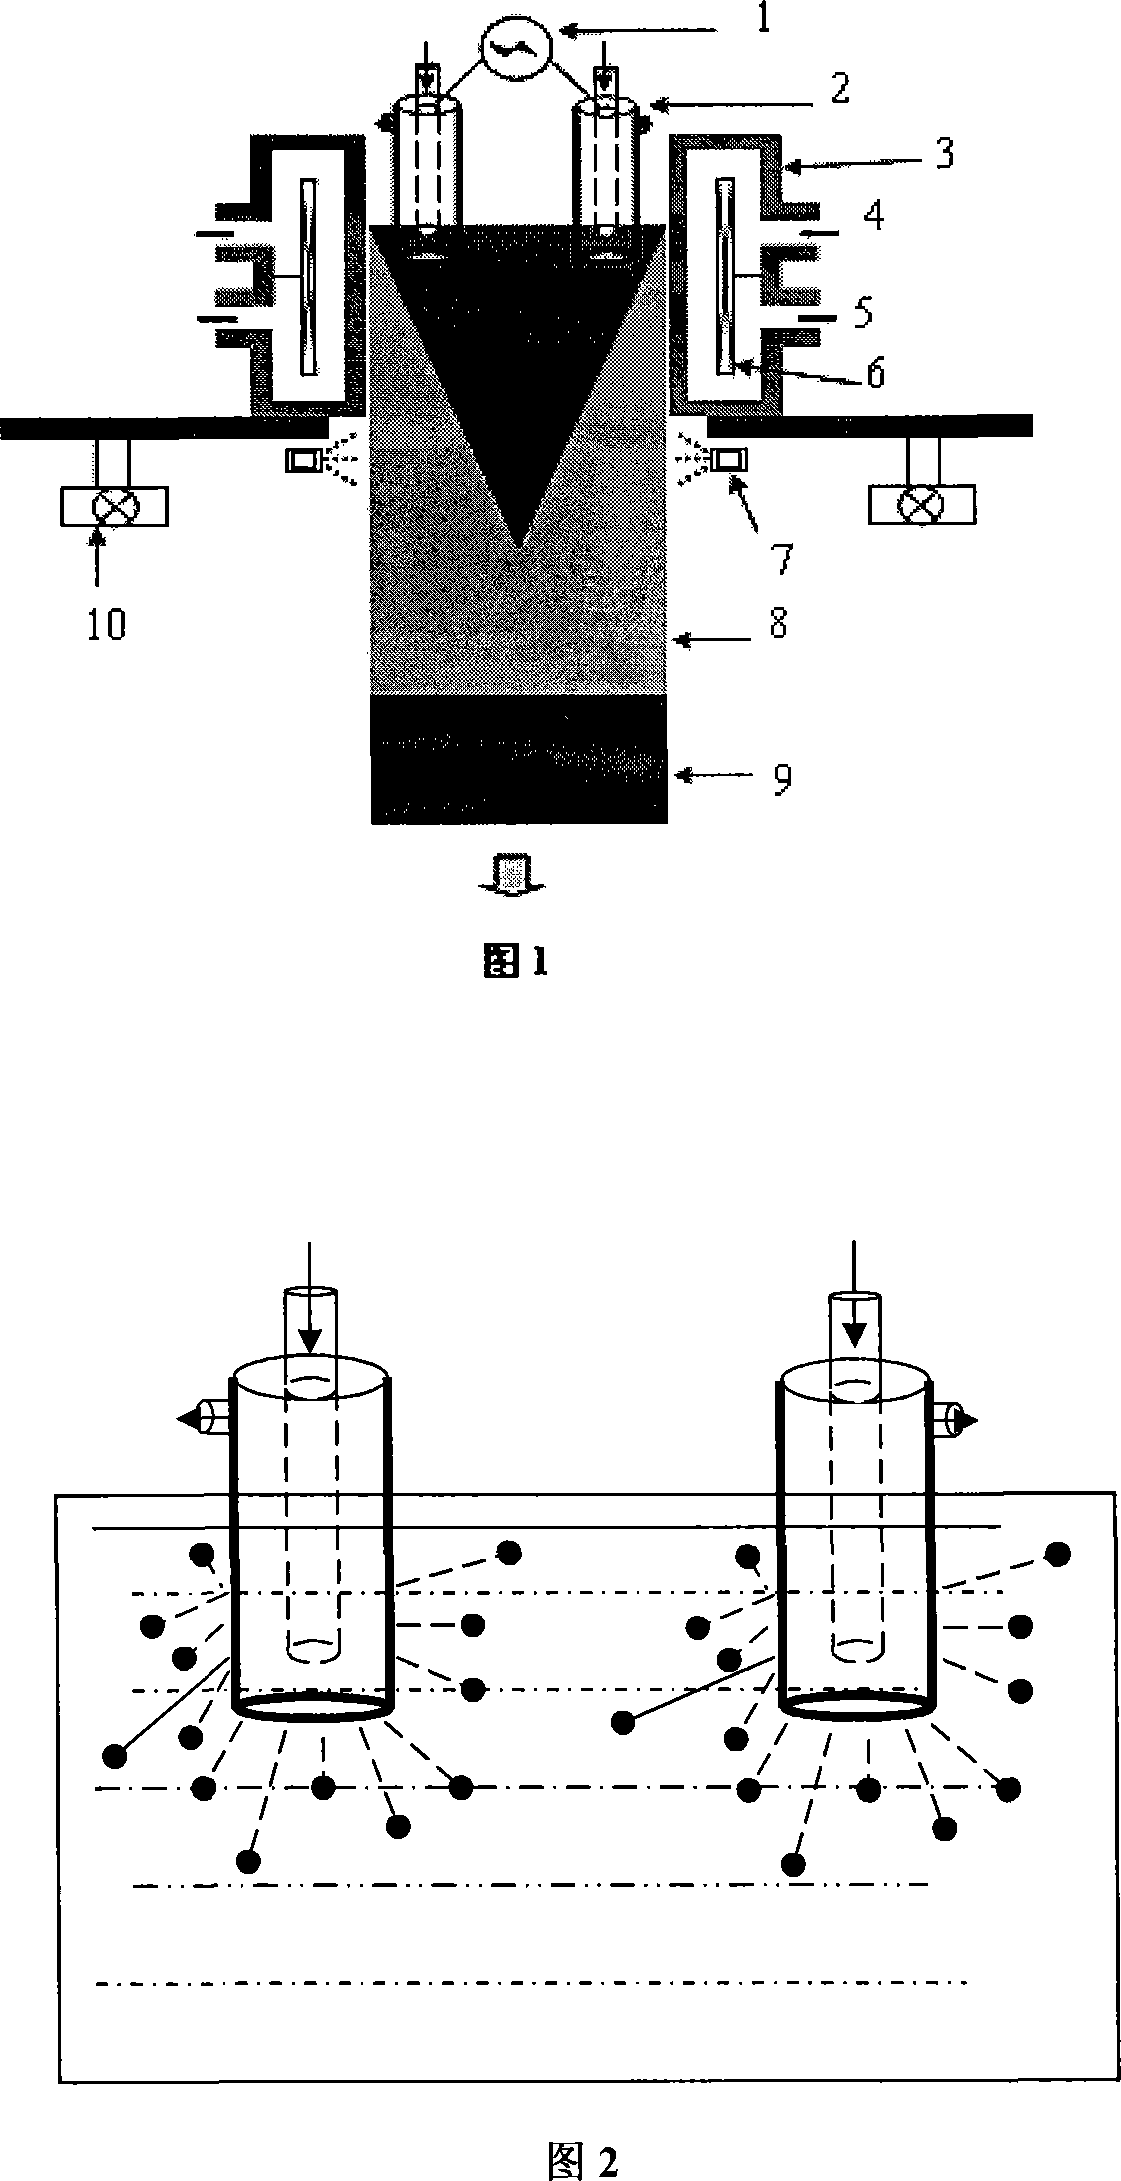 Method for composite electromagnetic continuous-casting high-oriented ultra-fine grained materials